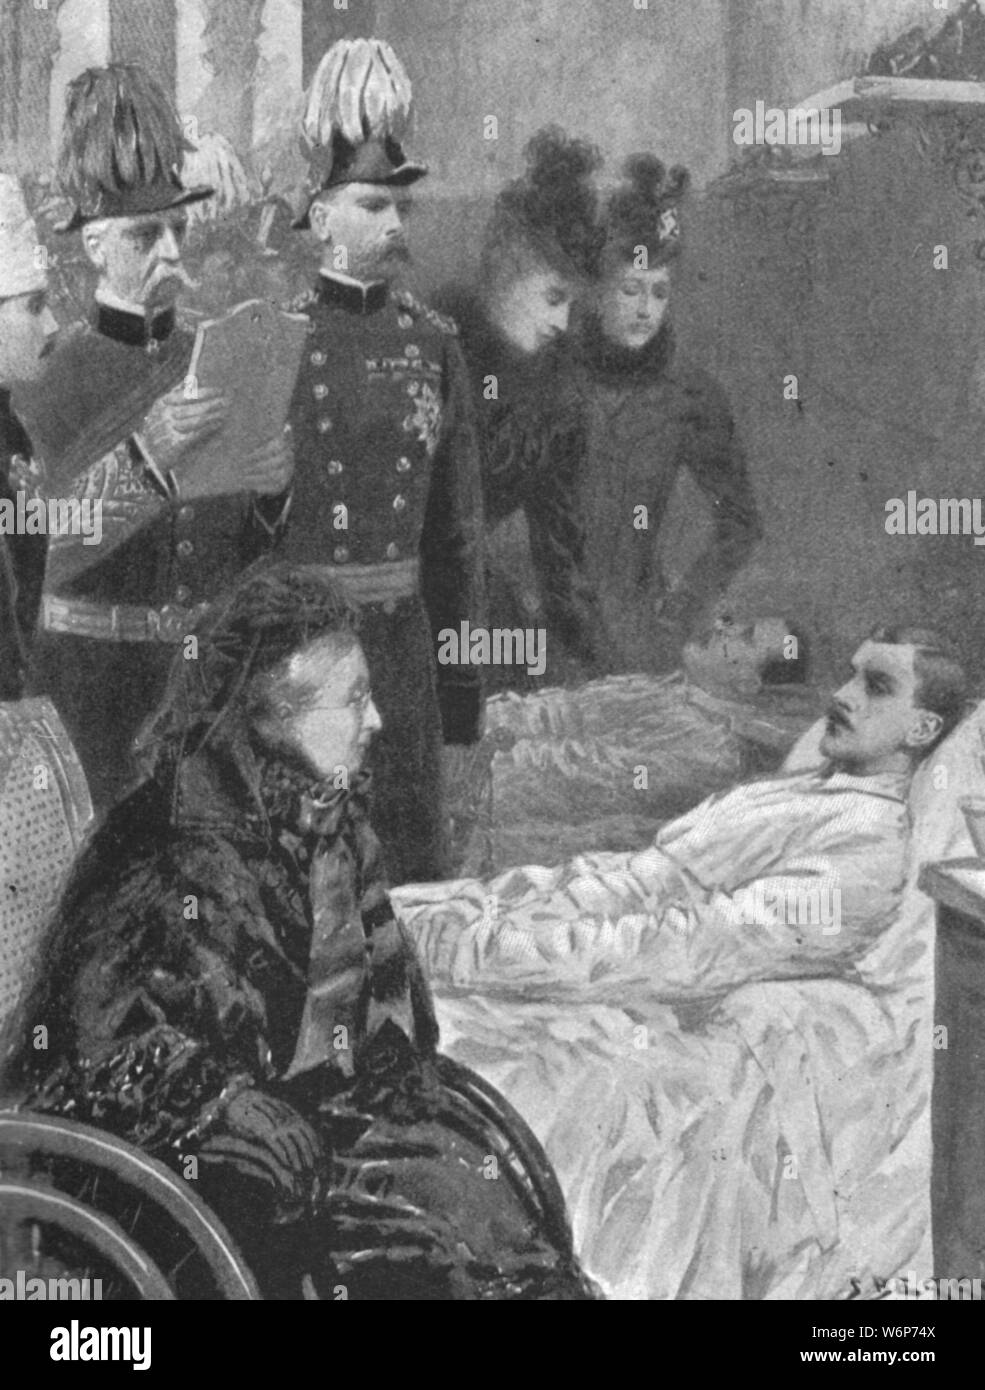 'Queen Victoria at Netley Hospital visiting Soldiers wounded in the Indian Frontier campaigns, December 3, 1898', (1901). Victoria (1819-1901) with injured men of the British Army, recovering in a hospital near Southampton, Hampshire. From &quot;The Illustrated London News Record of the Glorious Reign of Queen Victoria 1837-1901: The Life and Accession of King Edward VII. and the Life of Queen Alexandra&quot;. [London, 1901] Stock Photo